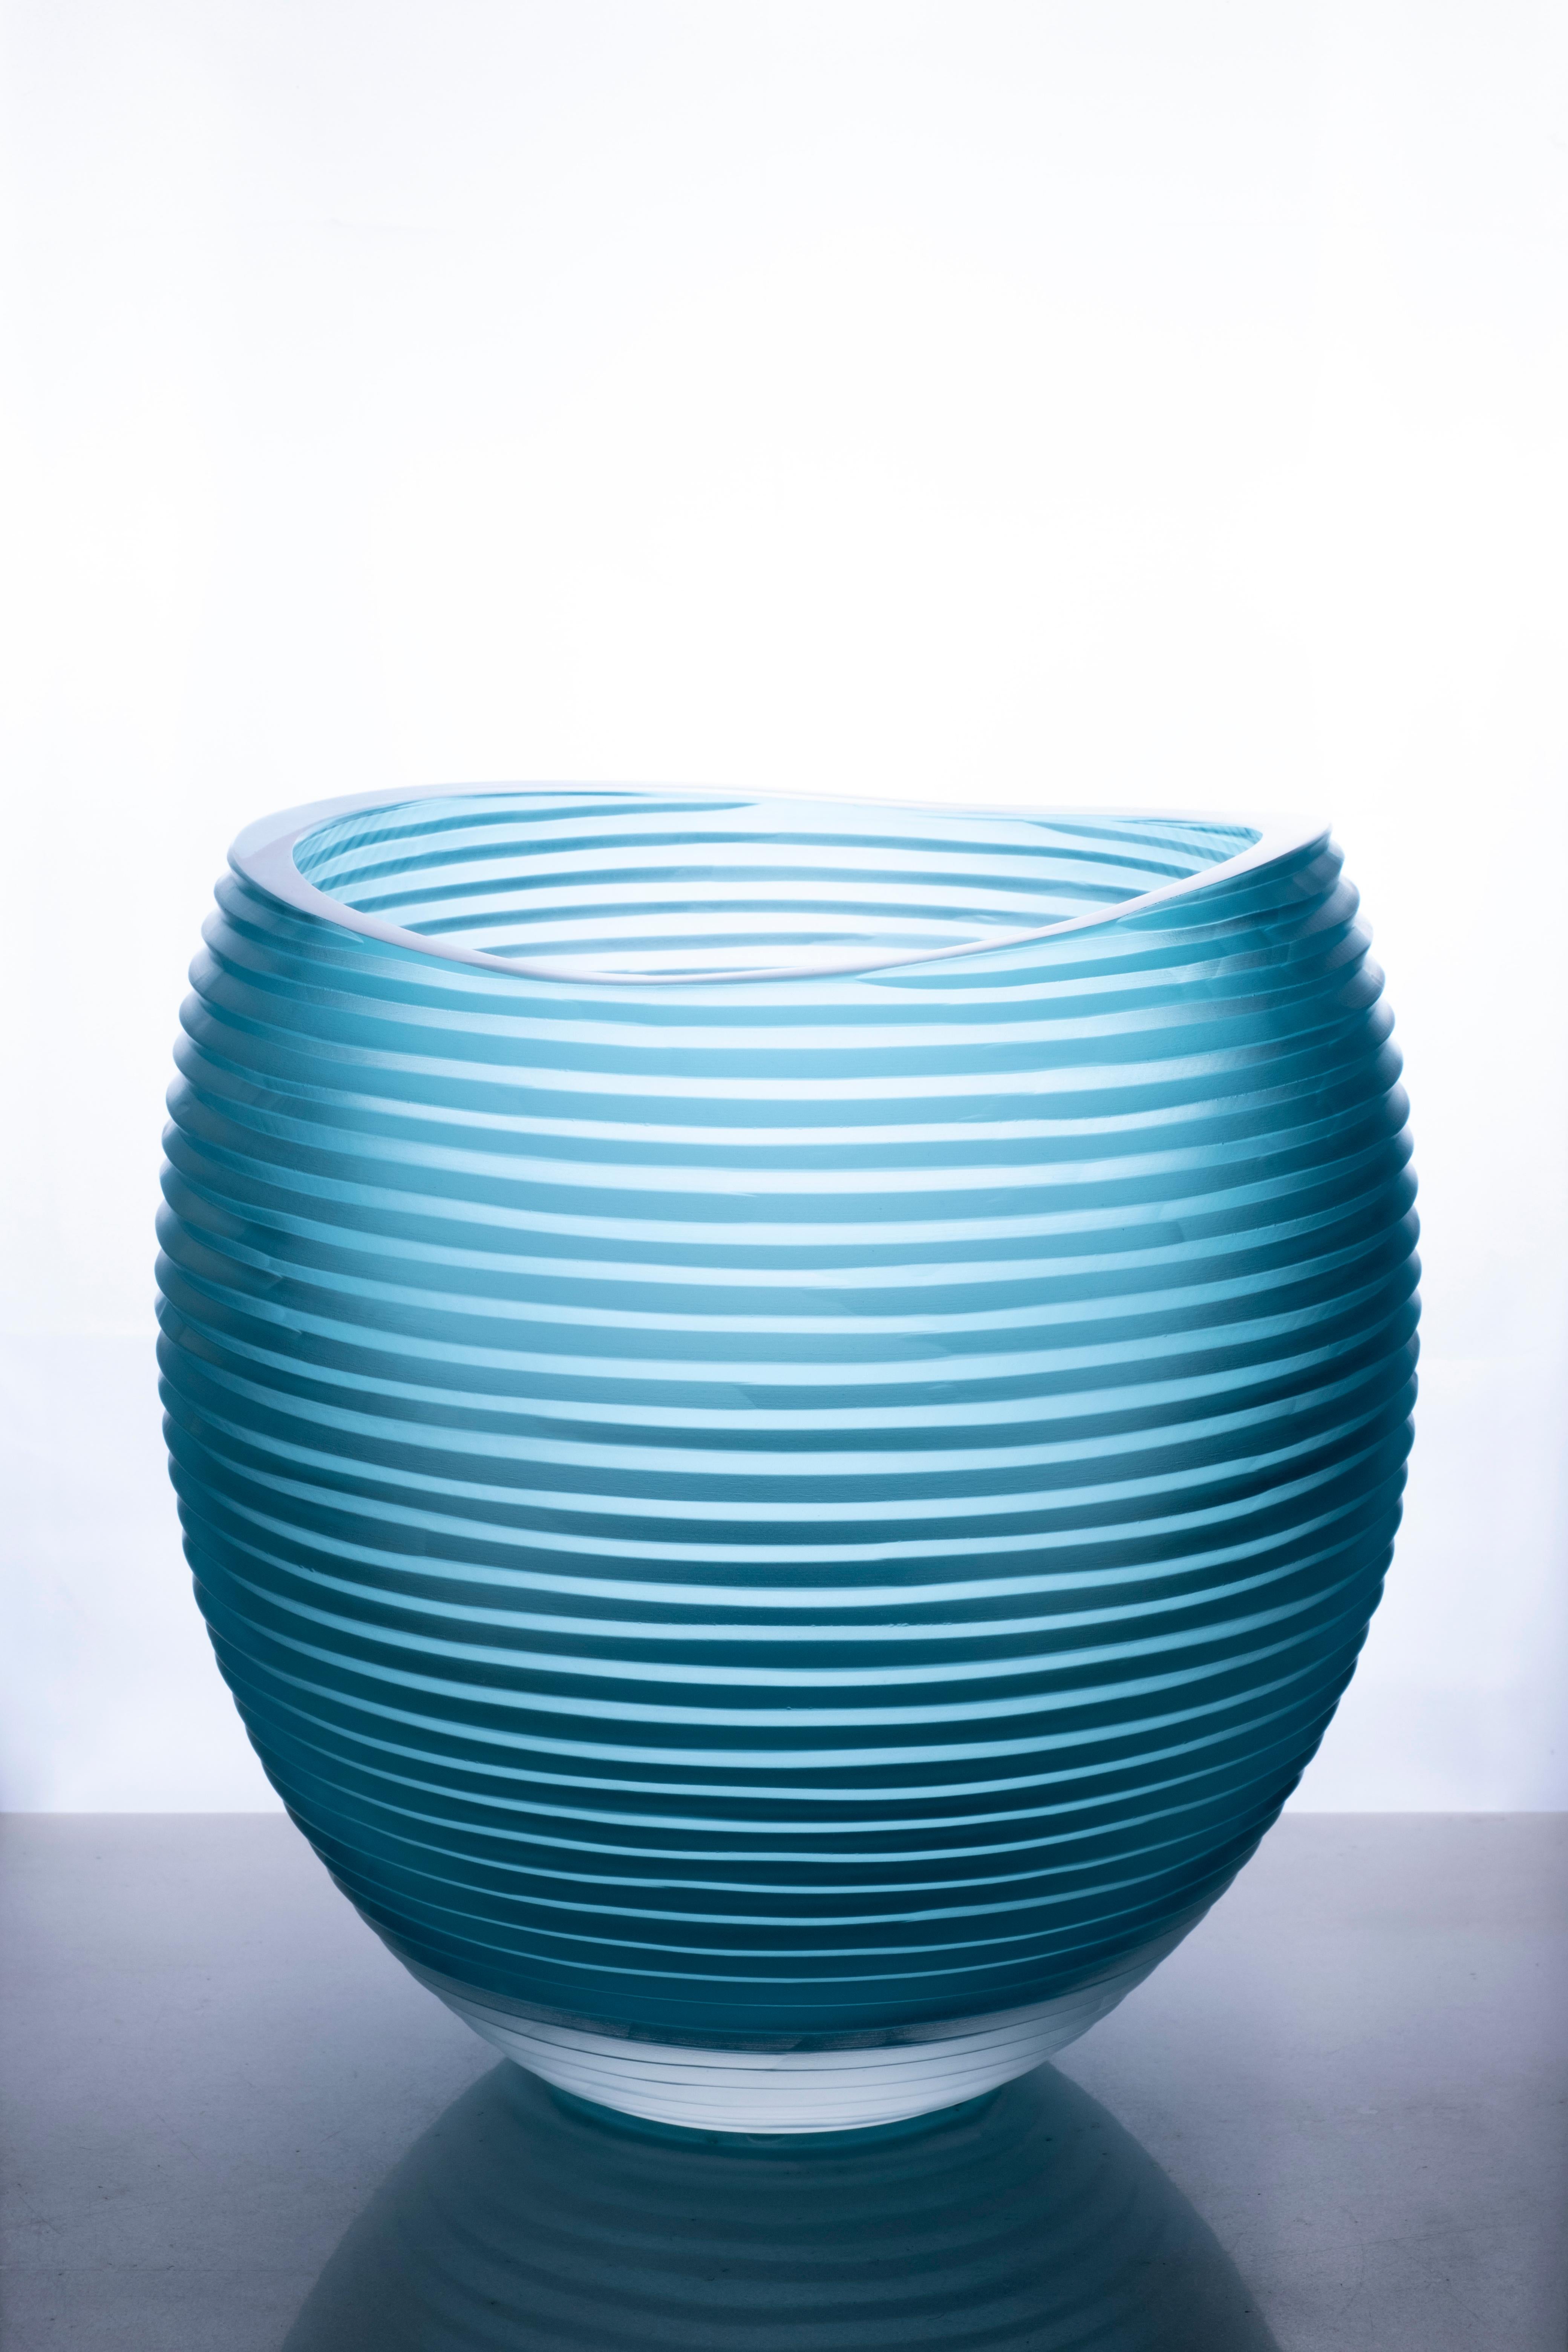 Incisioni Linae large vase by Purho
Dimensions: D 22 x H 35 cm.
Materials: glass
Other colors and dimensions are available.

Purho is a new protagonist of made in Italy design, a work of synthesis, a research that has lasted for years, an